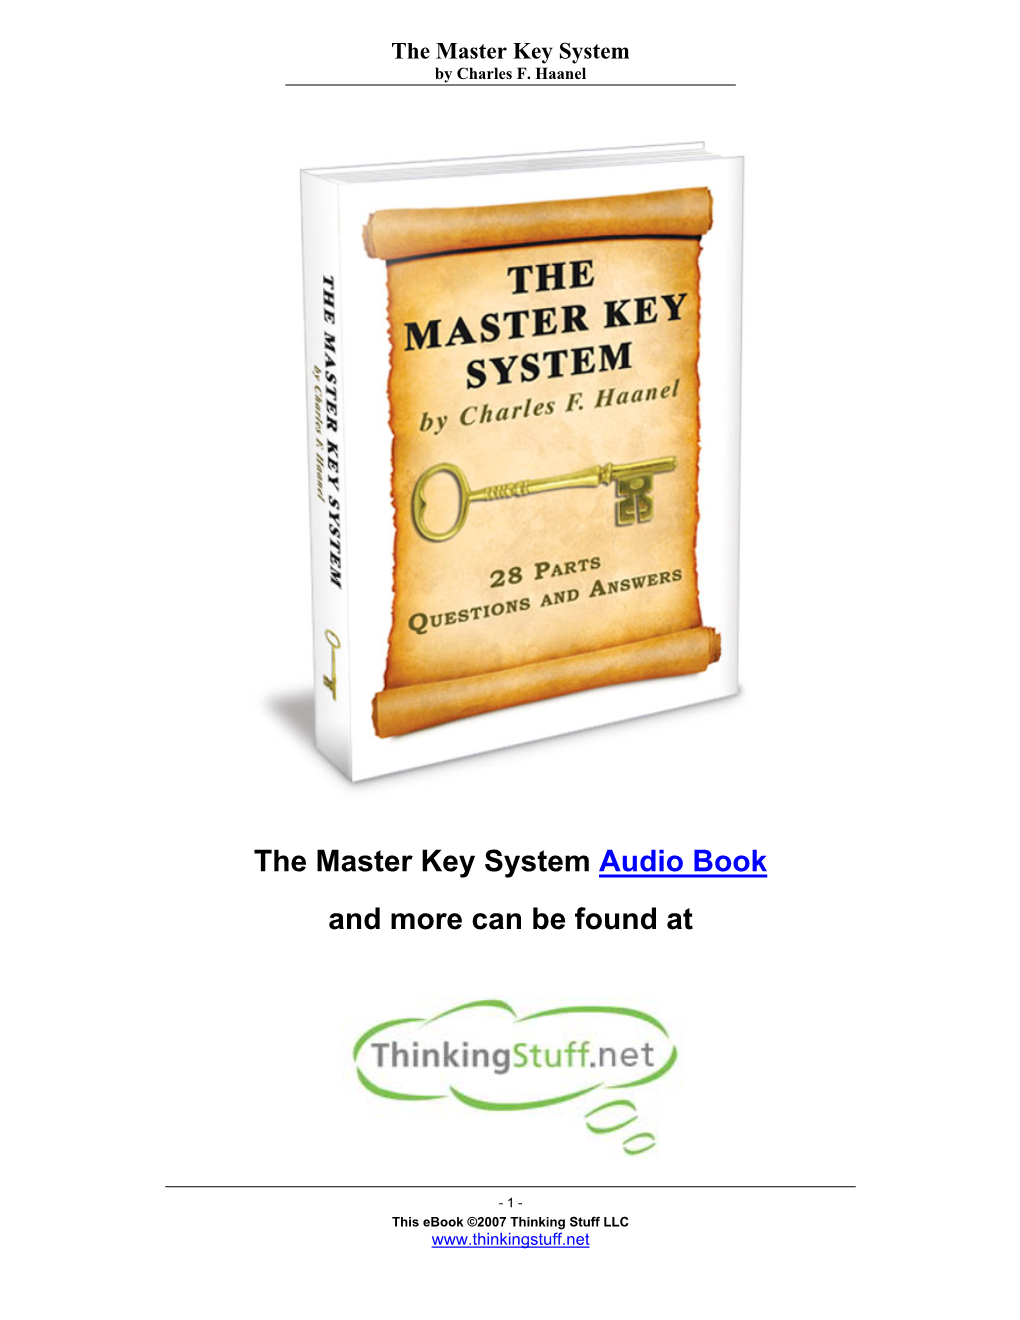 The Master Key System by Charles F